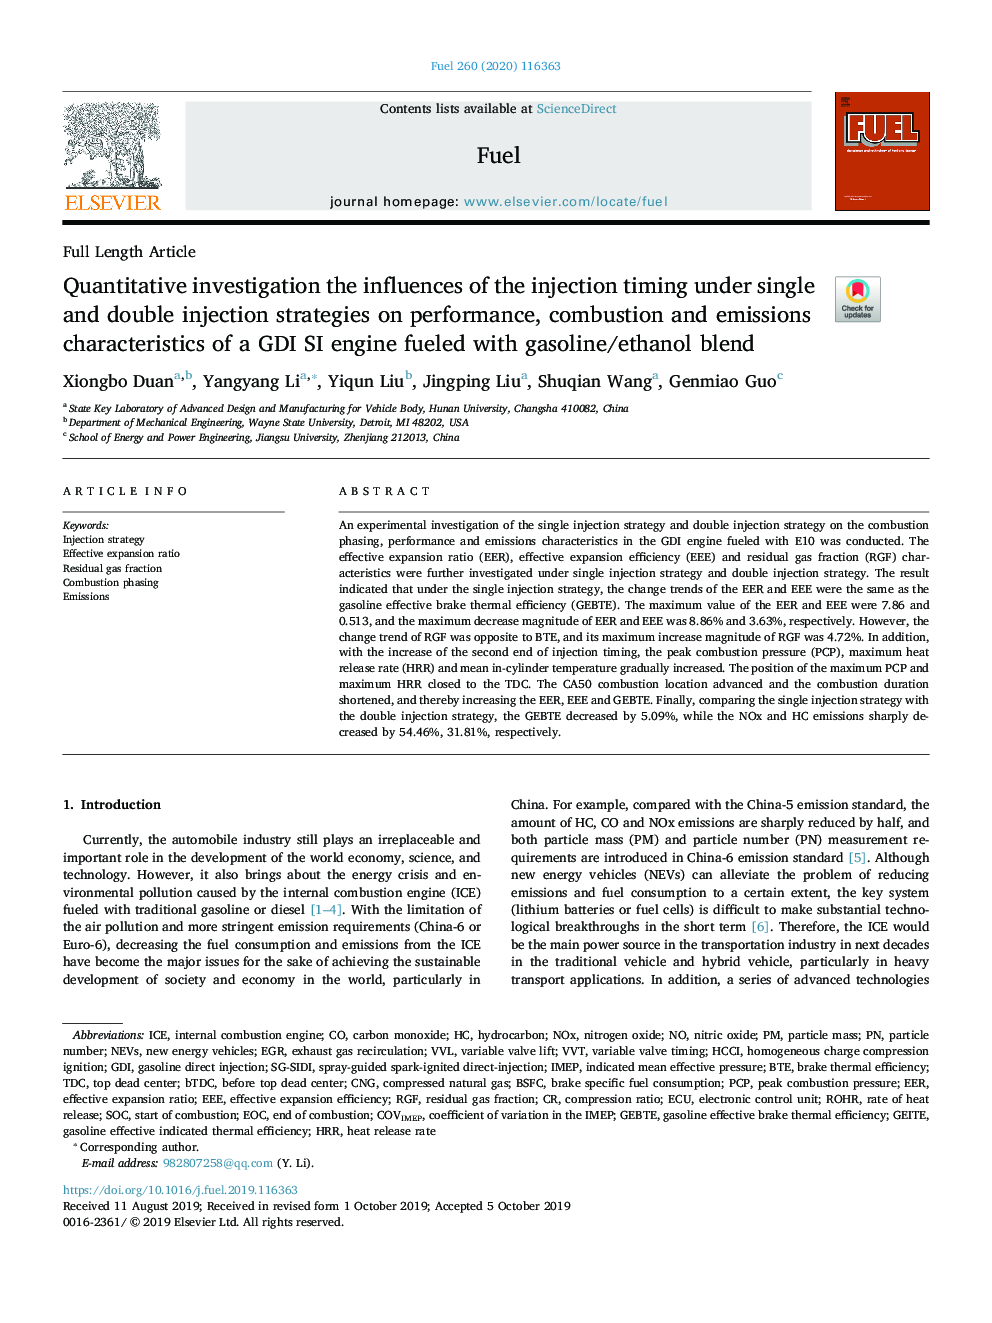 Quantitative investigation the influences of the injection timing under single and double injection strategies on performance, combustion and emissions characteristics of a GDI SI engine fueled with gasoline/ethanol blend